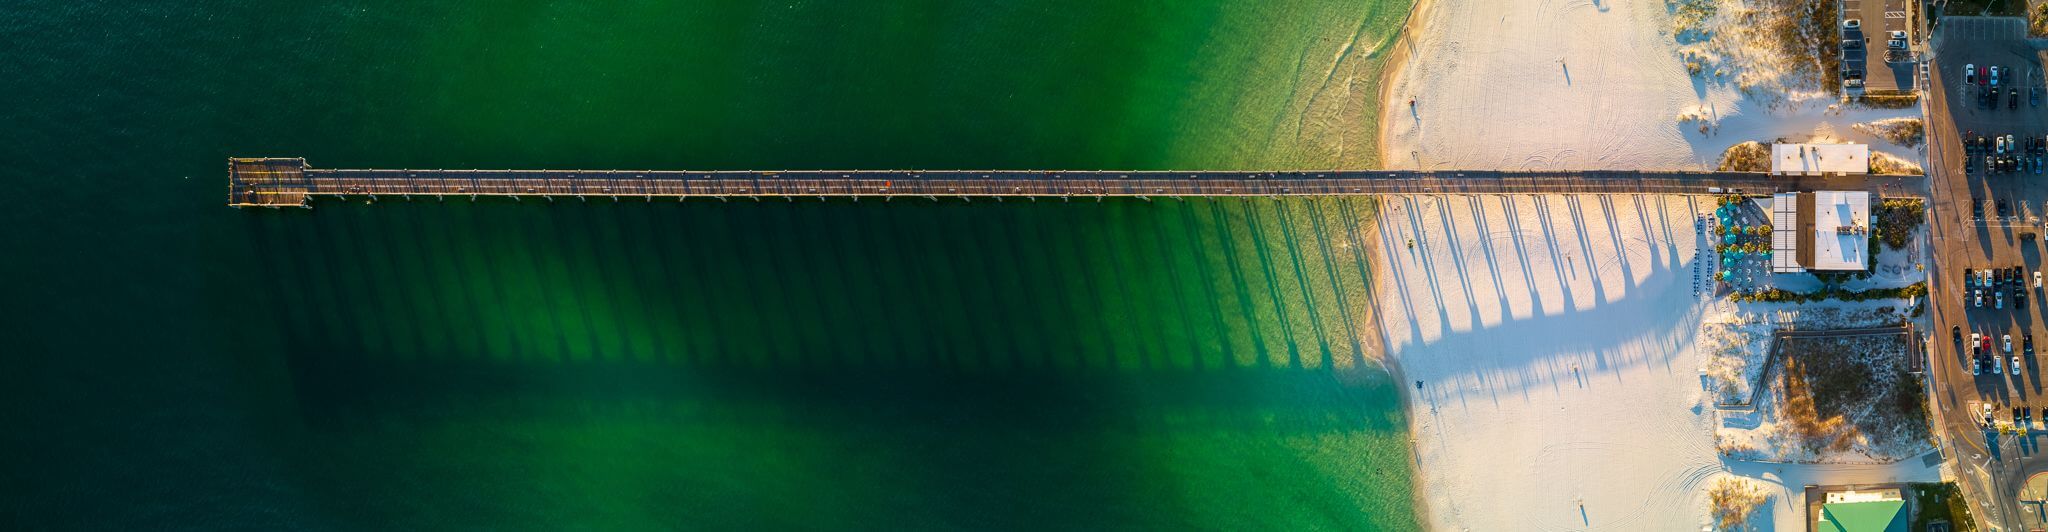 Wooden pier stretching out into emerald green waters.